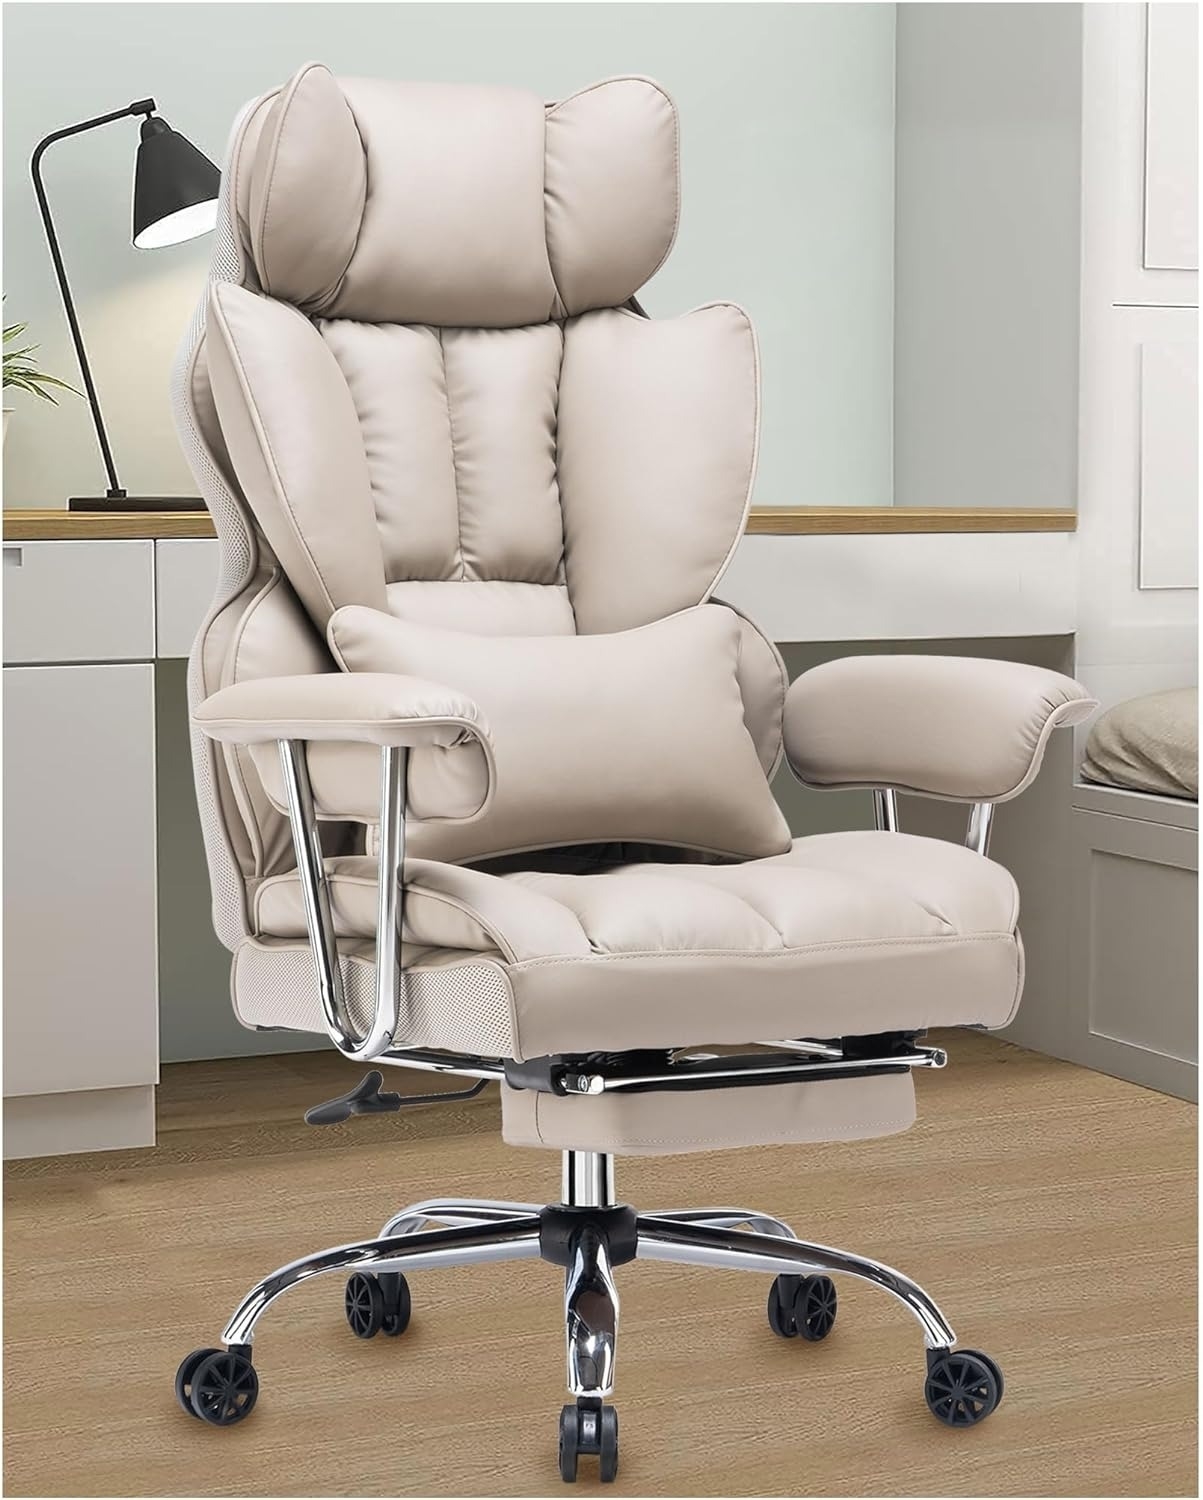 Ergonomic office chair with padded headrest and armrests in a home office setup